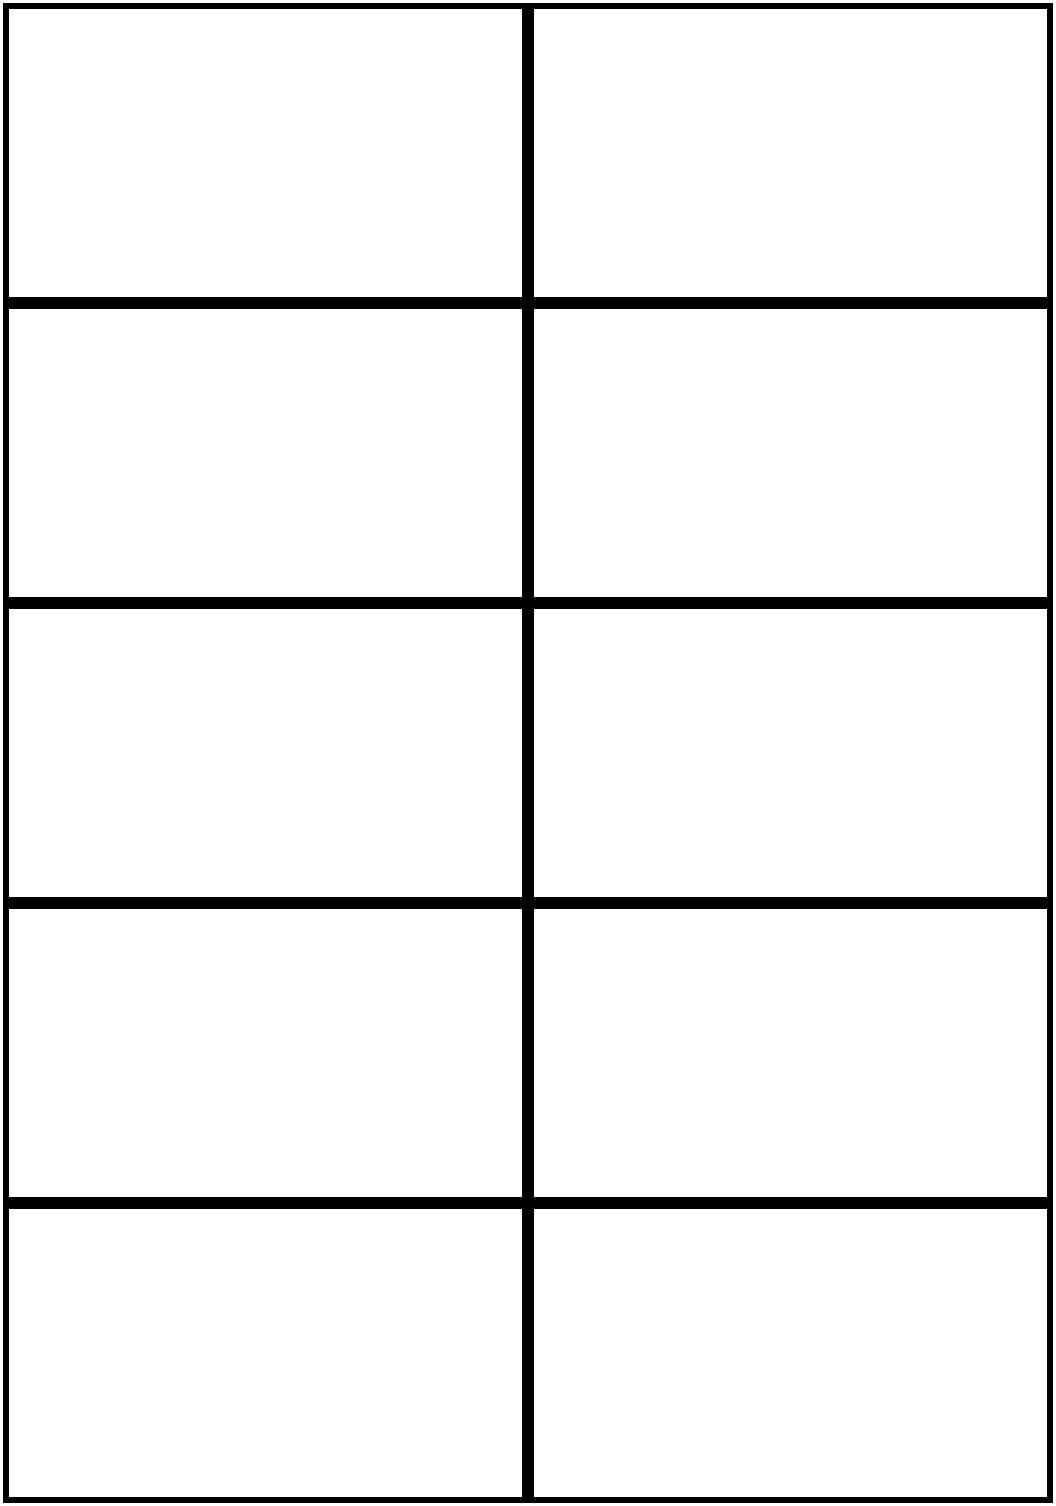 Image Result For Flashcards Template Word | Free Printable Inside Baseball Card Size Template